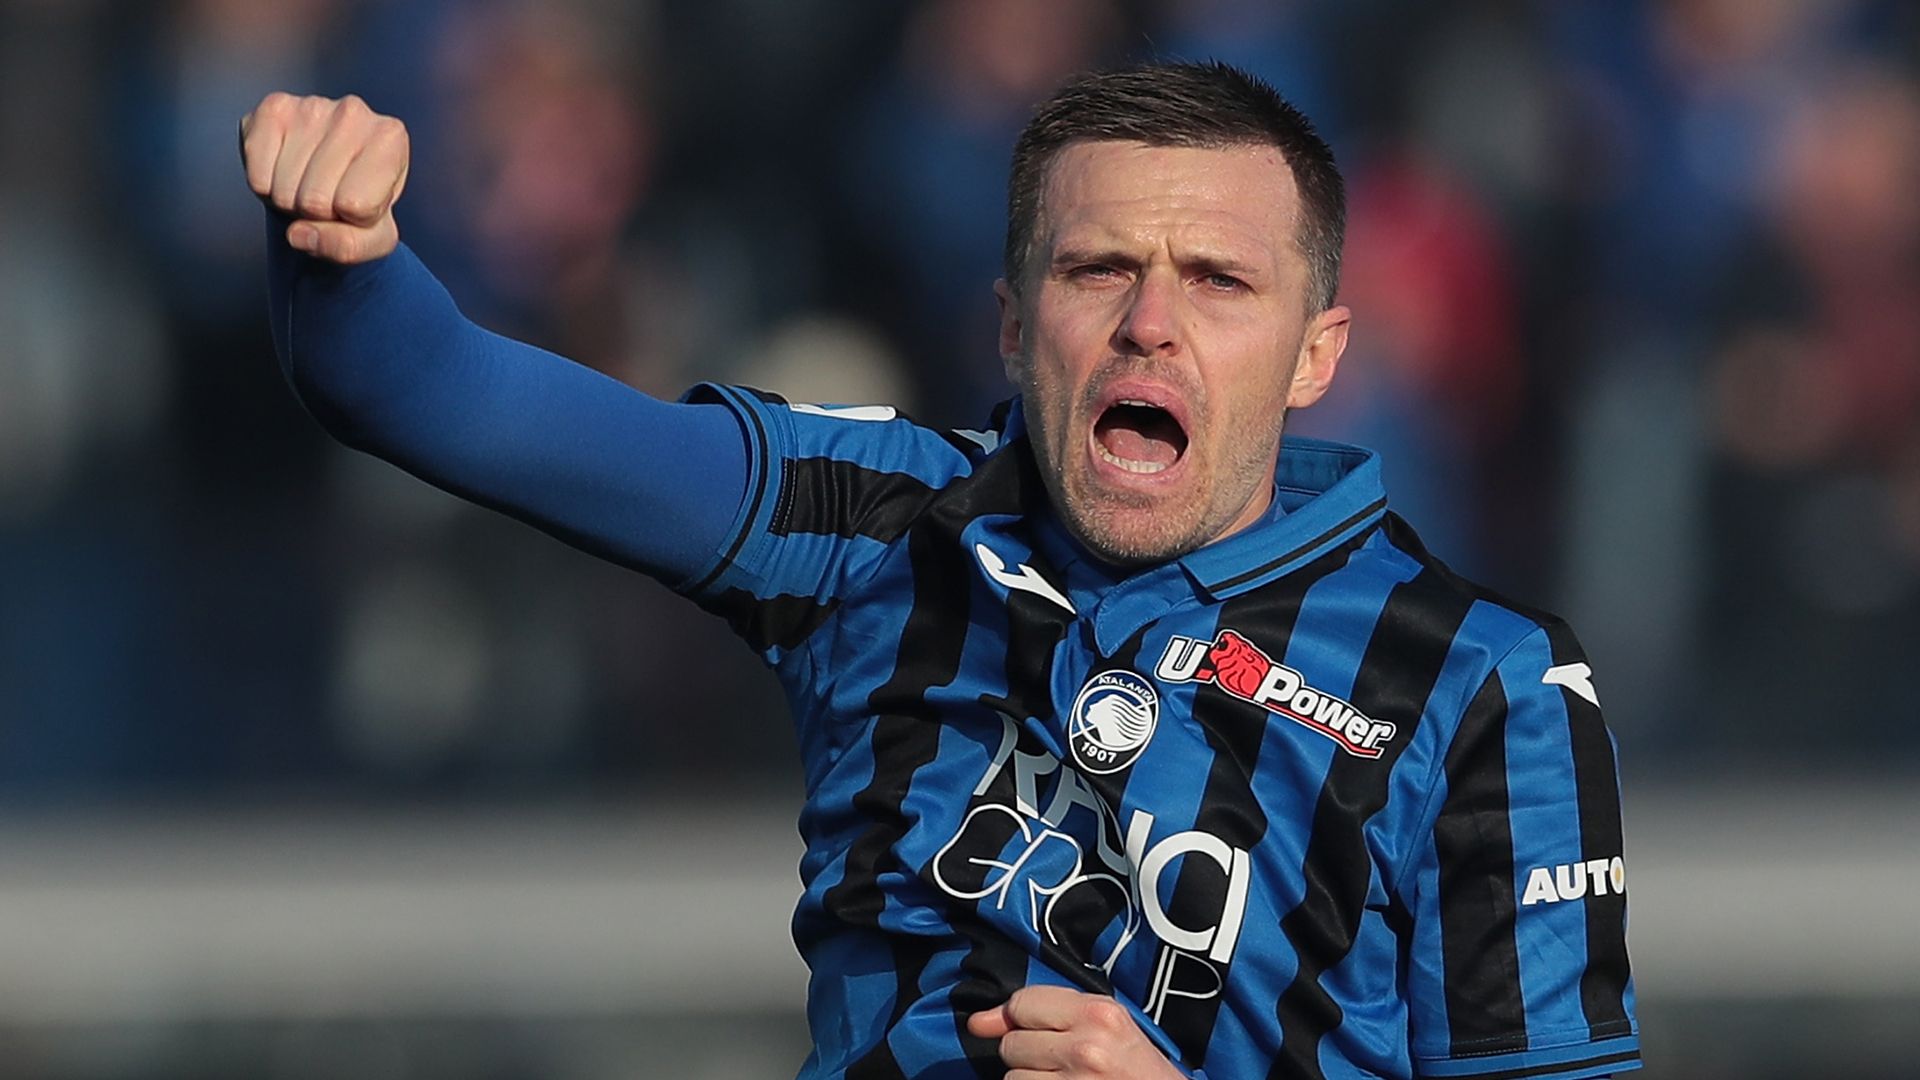 With more goals than Ronaldo, Josip Ilicic is the unlikely star